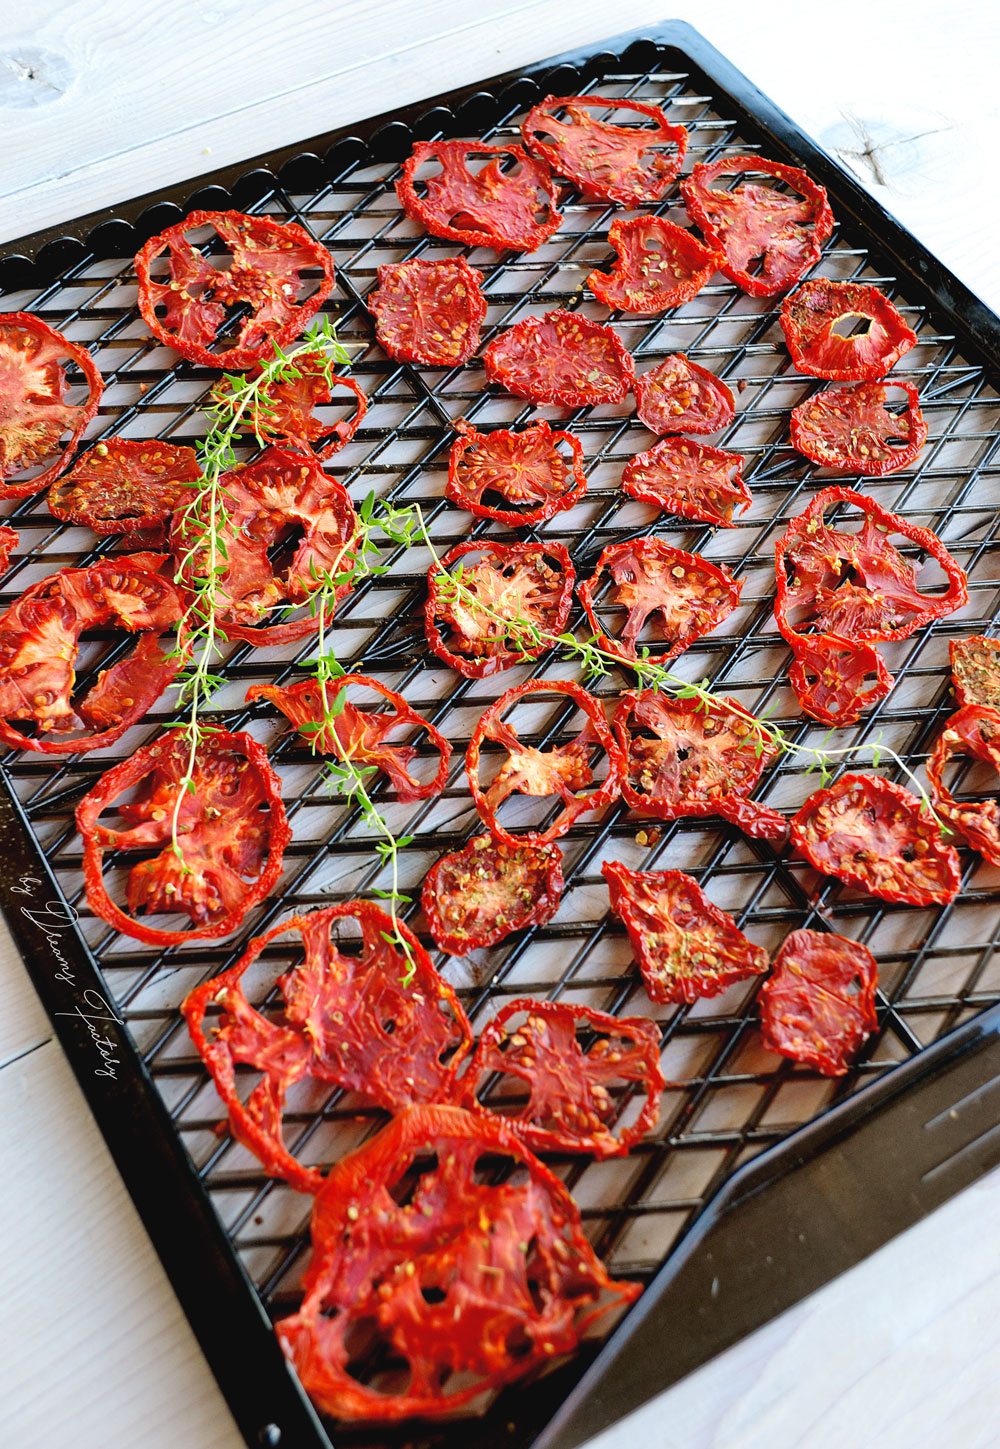 Make these healthy and insanely delicious sun-dried tomatoes with aromatic herbs following these simple steps! www.bydreamsfactory.com